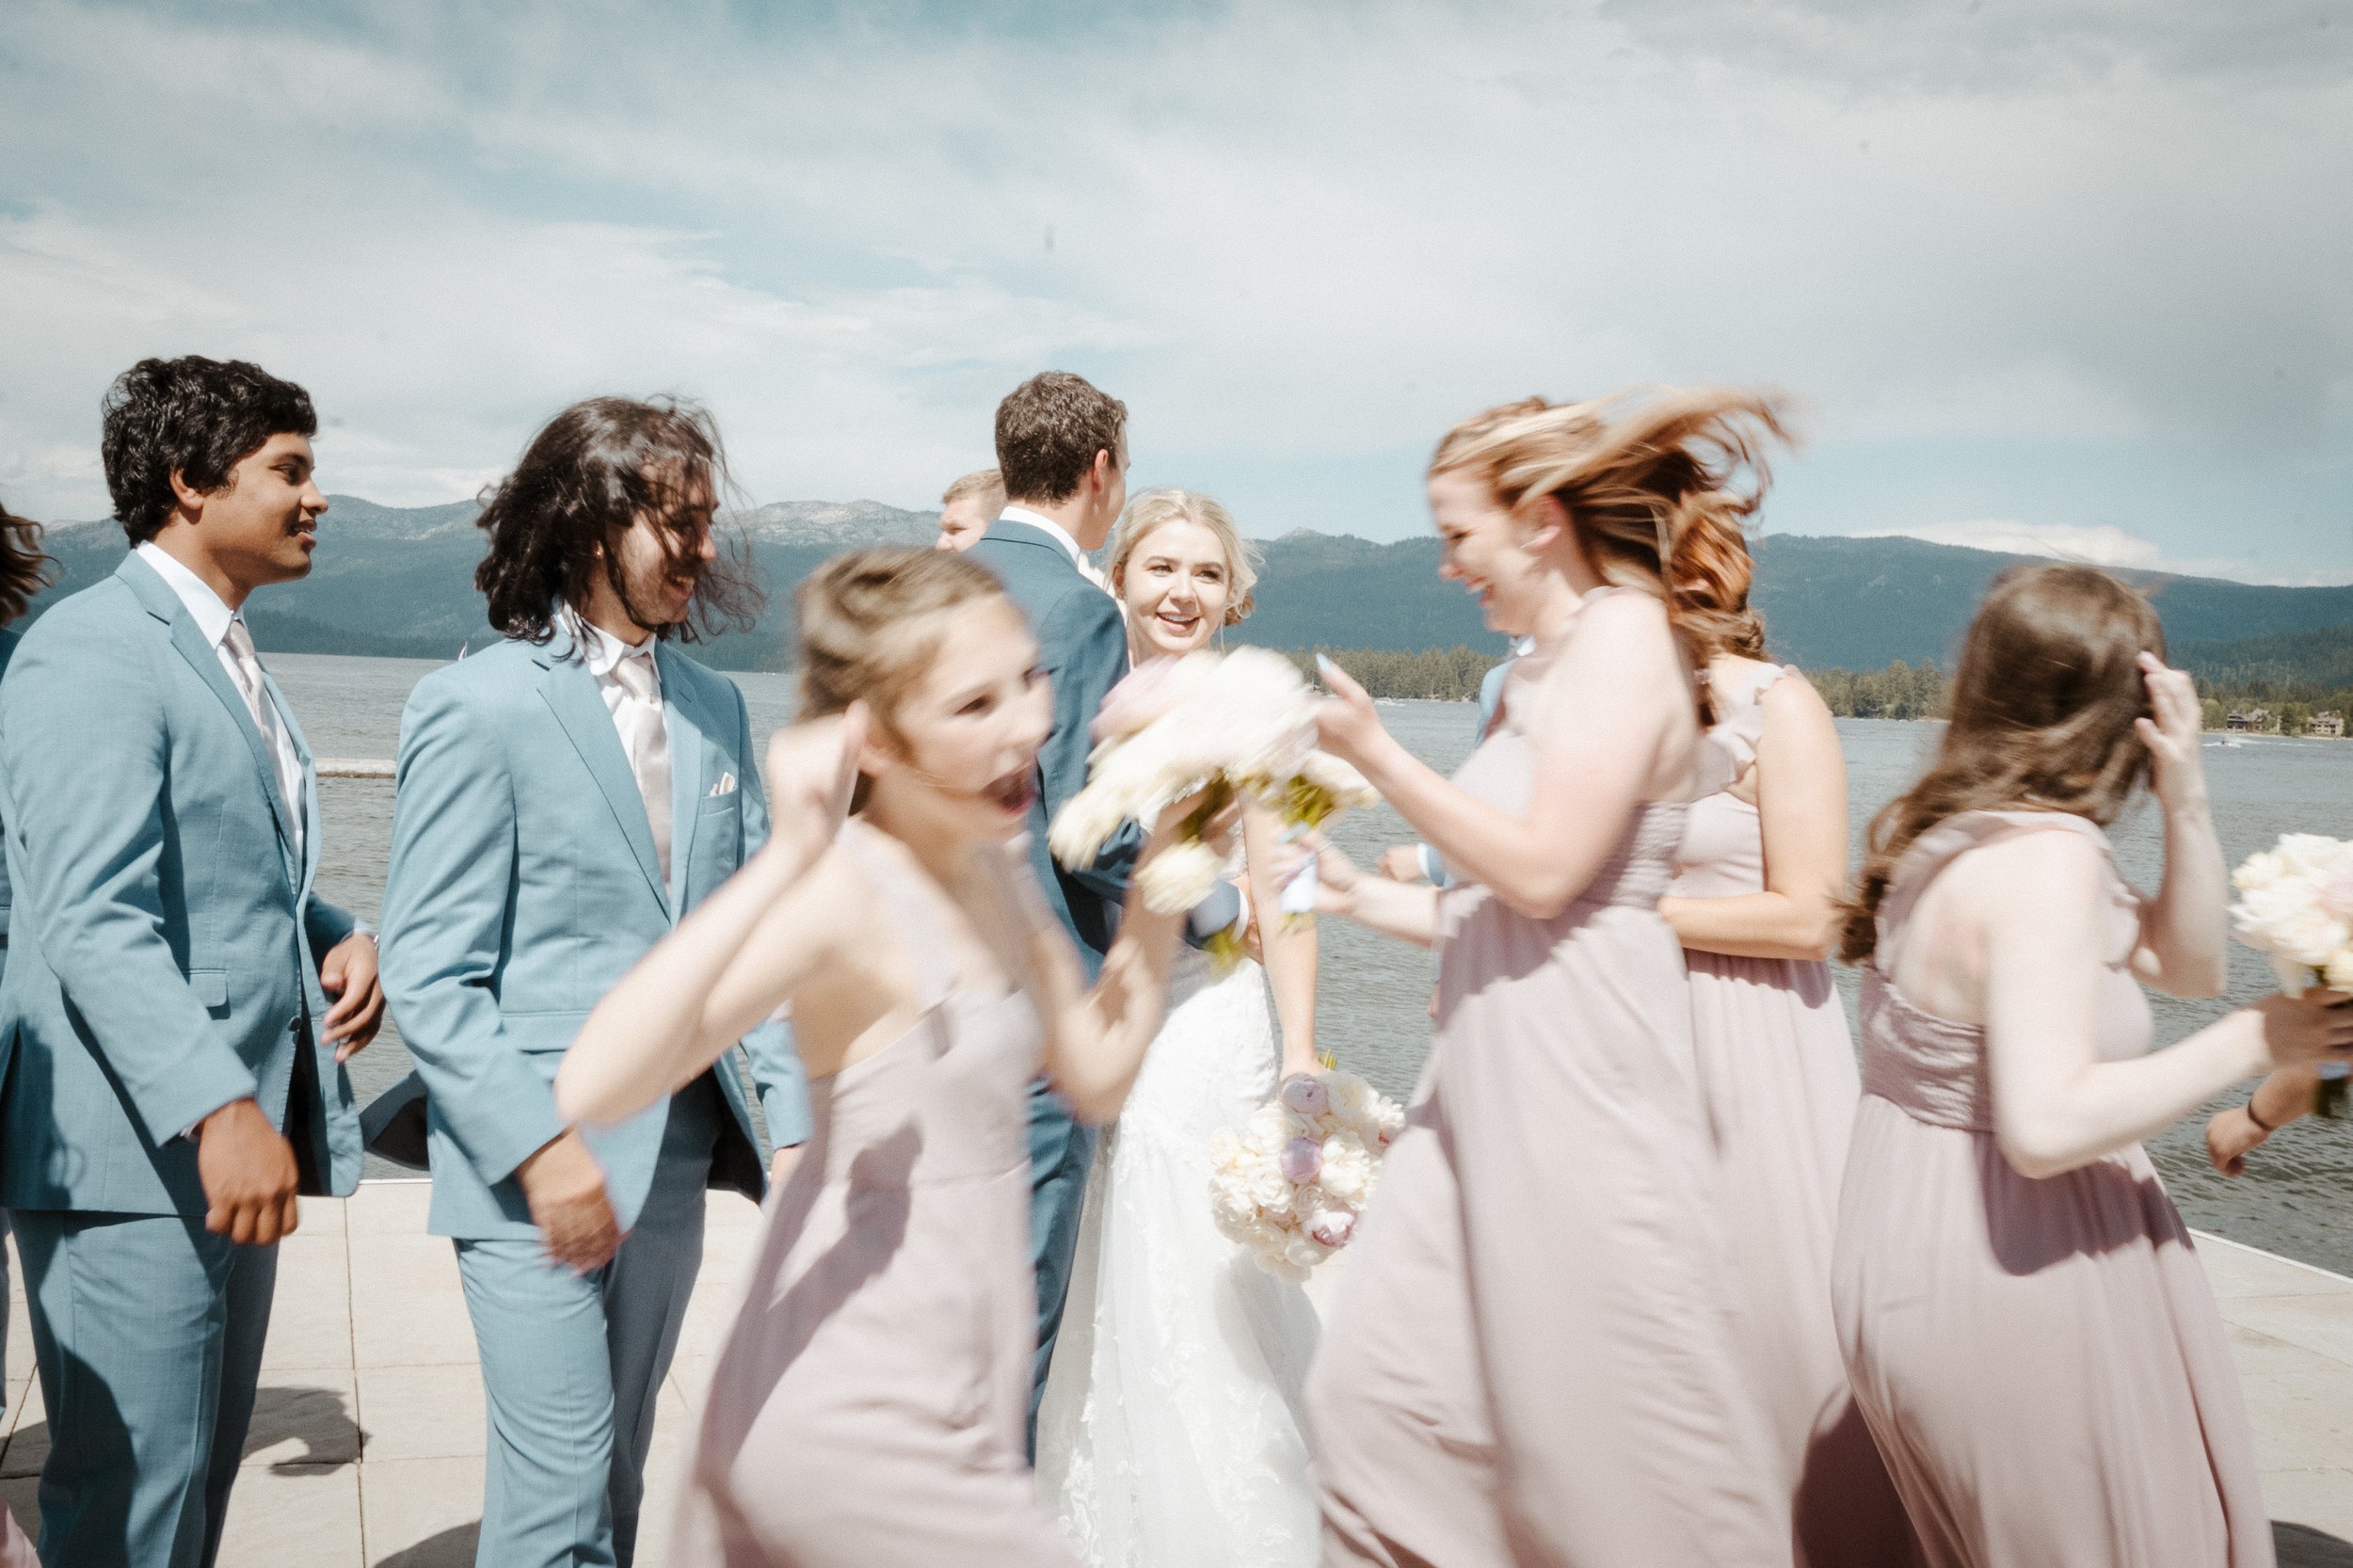 Bridal Party Dance around Couple